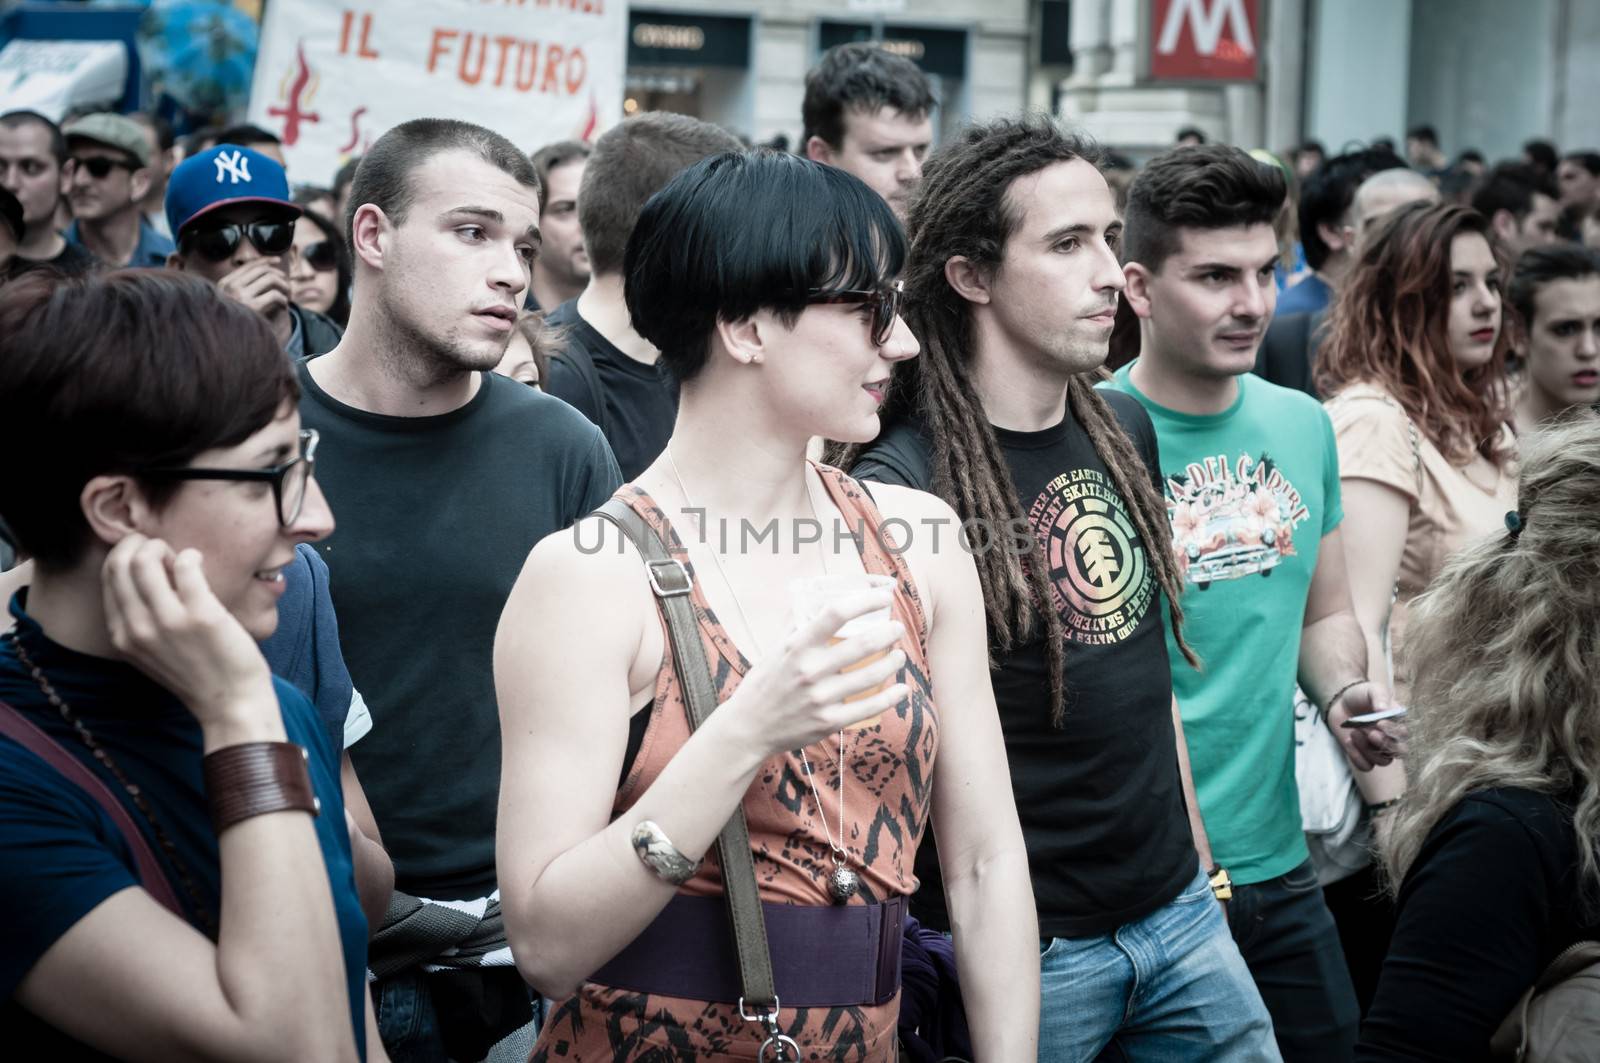 Labor day celebration in Milan May 1, 2013 by peus